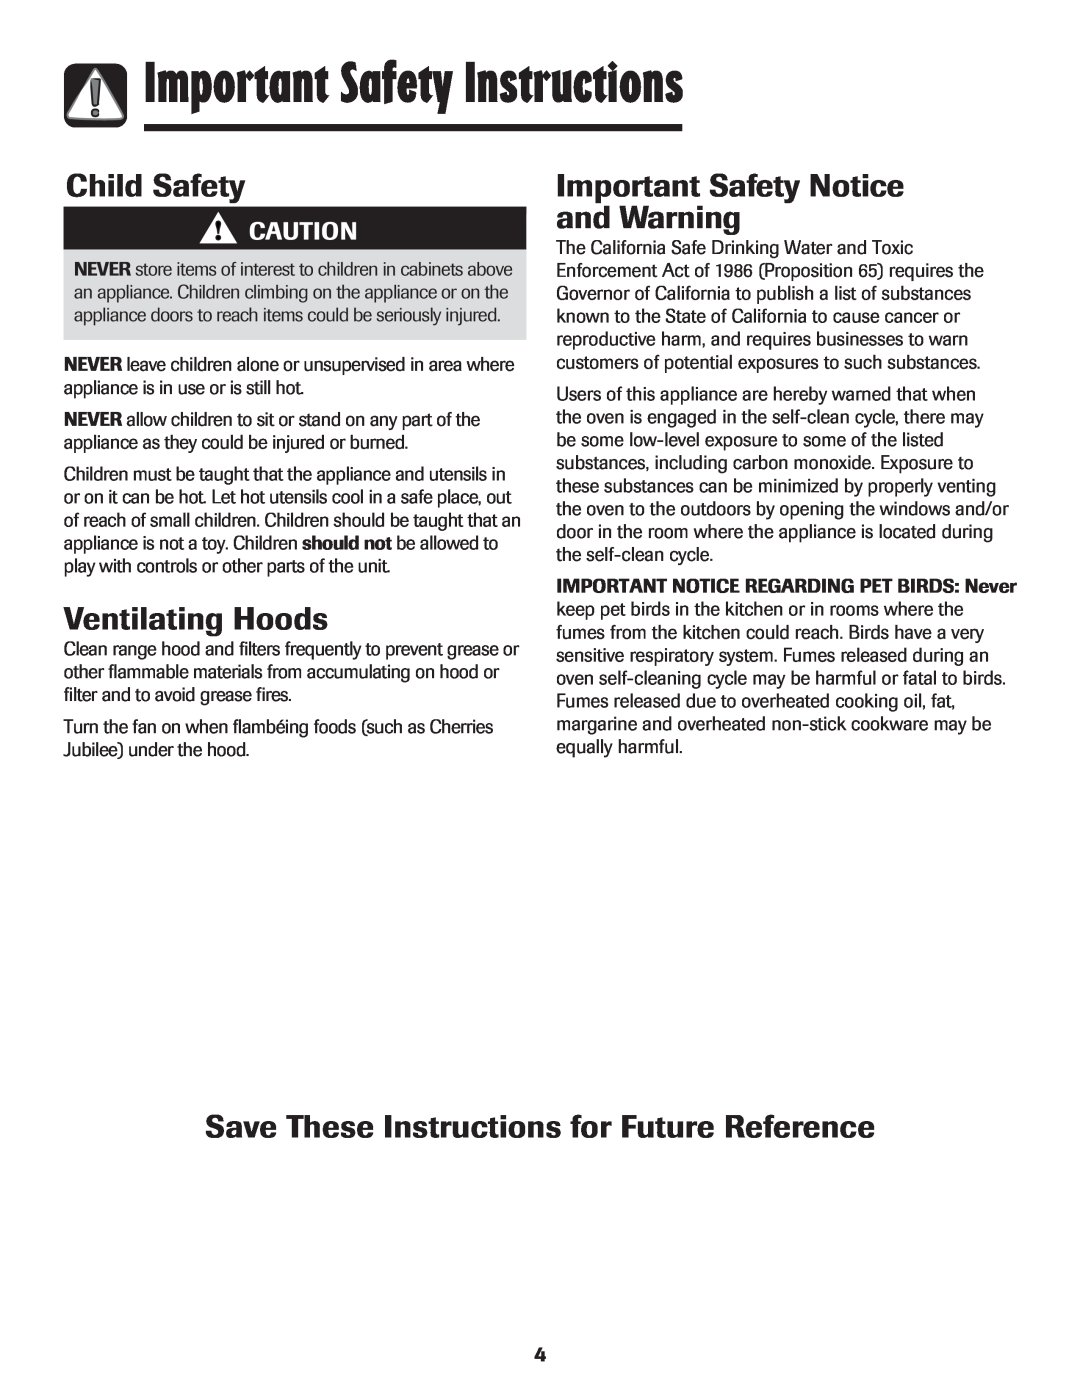 Maytag 500 Series Child Safety, Ventilating Hoods, Important Safety Notice and Warning, Important Safety Instructions 